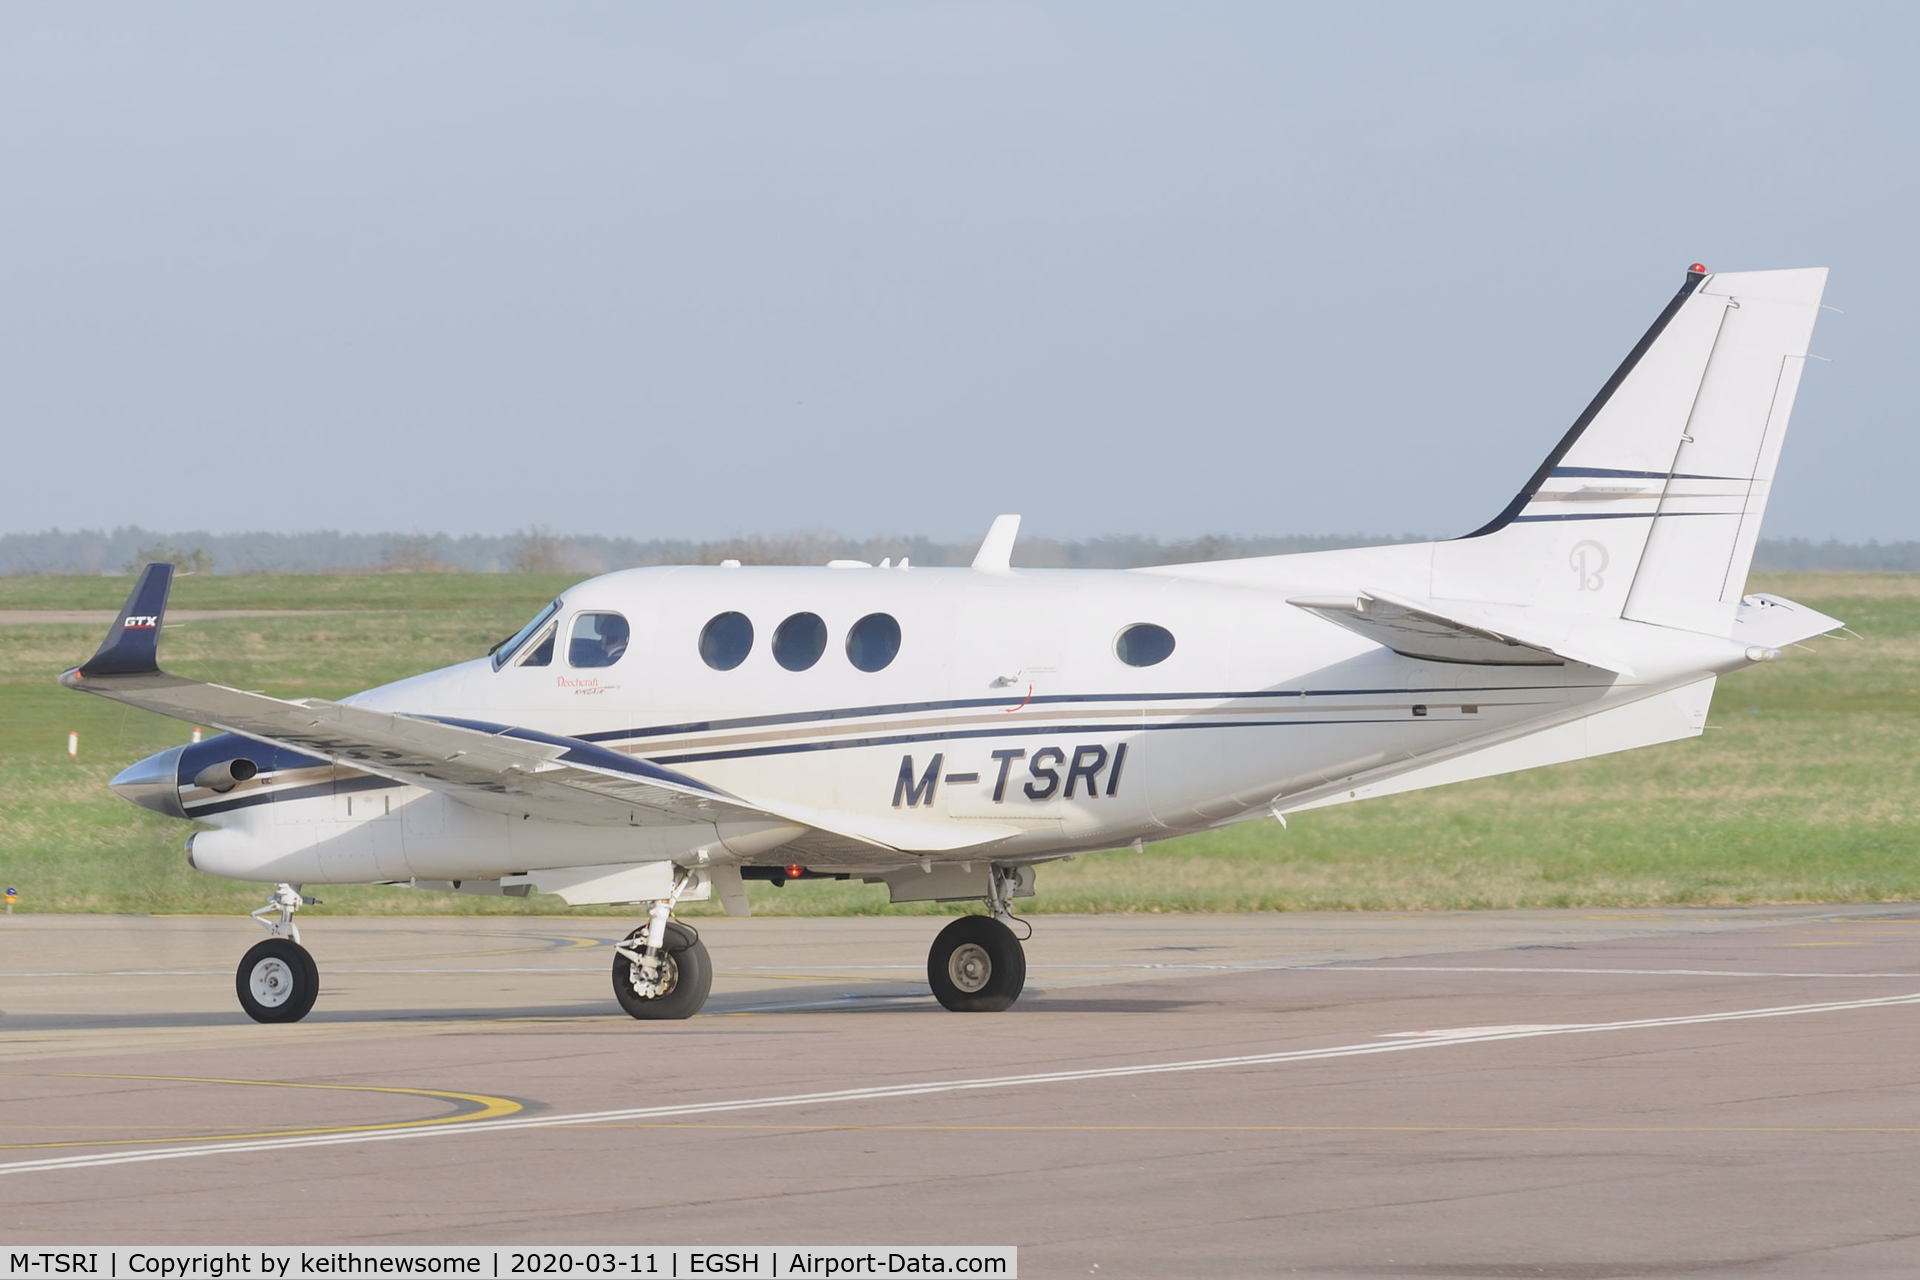 M-TSRI, 2006 Raytheon C90GT King Air King Air C/N LJ-1795, Arriving at Norwich from Chester.